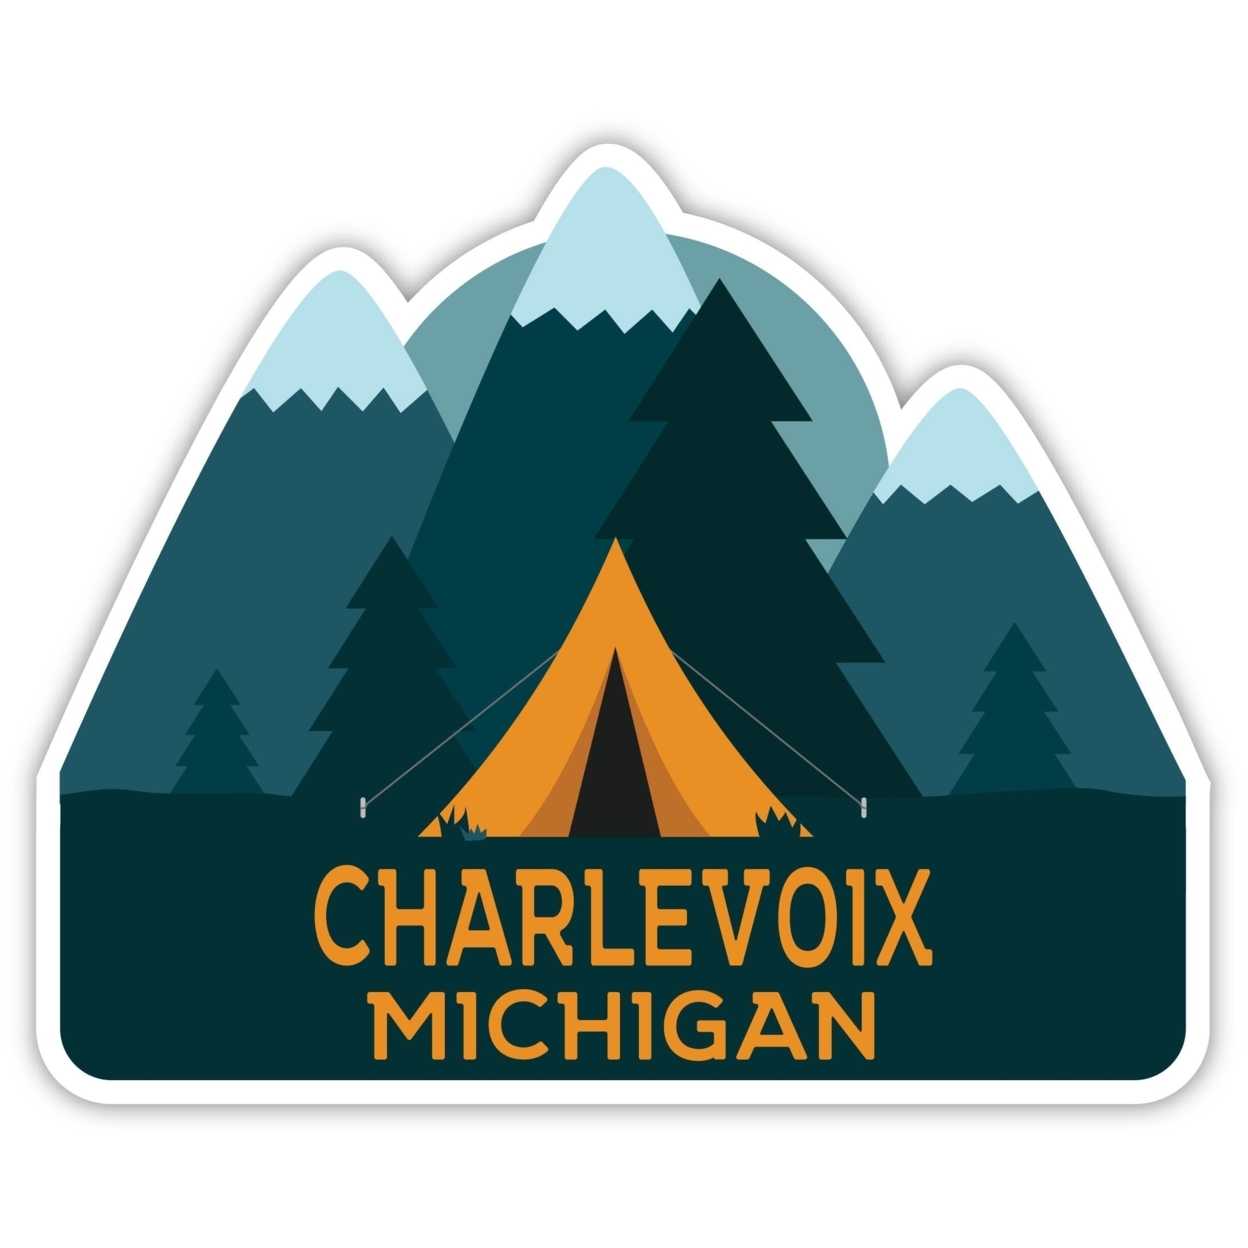 Charlevoix Michigan Souvenir Decorative Stickers (Choose Theme And Size) - 4-Pack, 10-Inch, Adventures Awaits